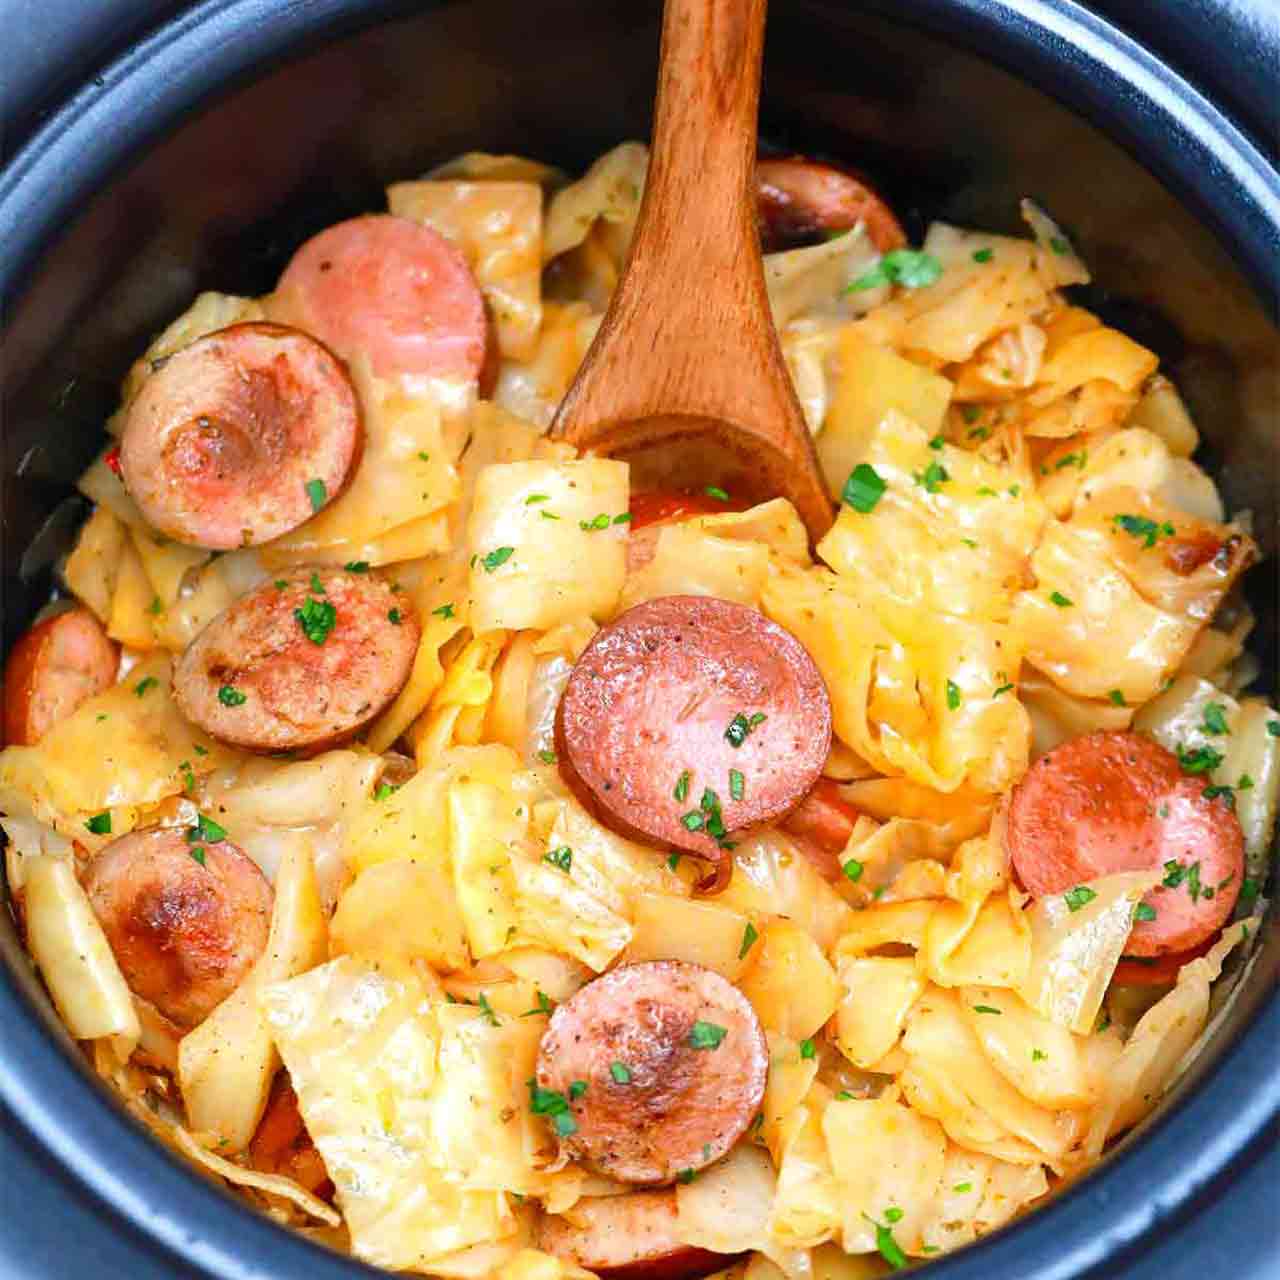 Crock Pot Sausage and Potatoes (& VIDEO!) - Easy Slow Cooker Recipe